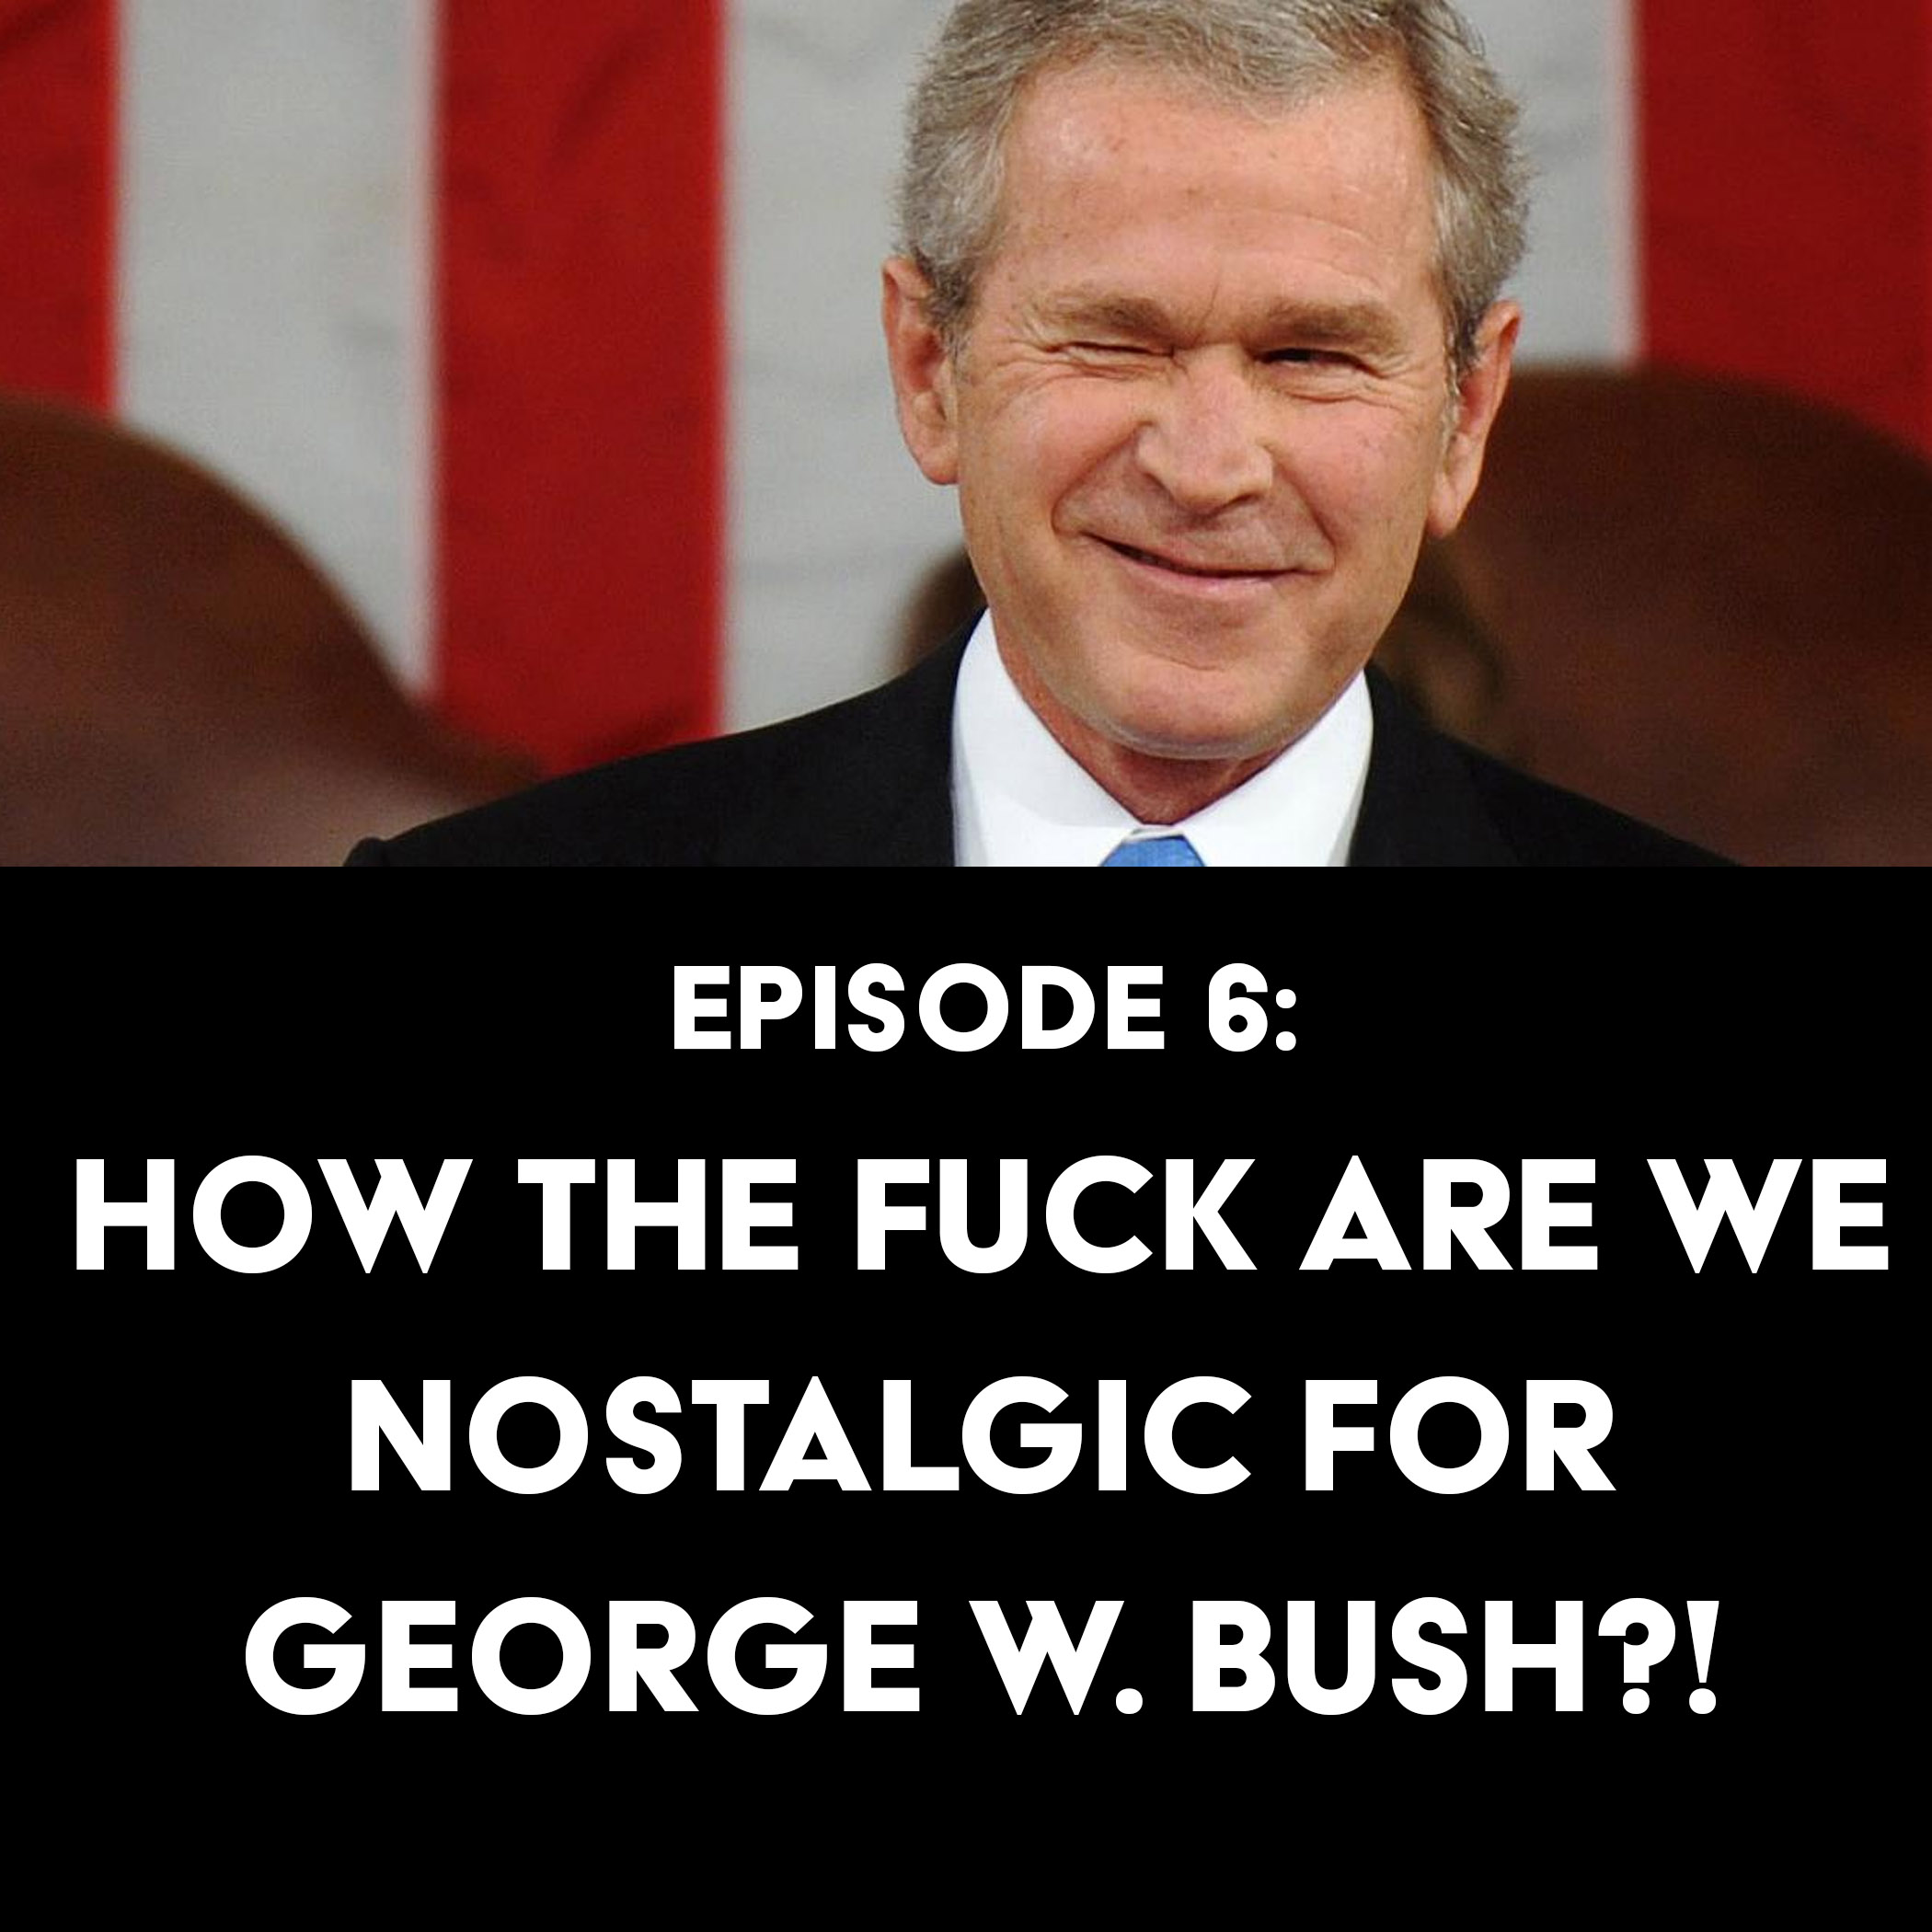 Episode 6: How the Fuck Are We Nostalgic for George W. Bush?!